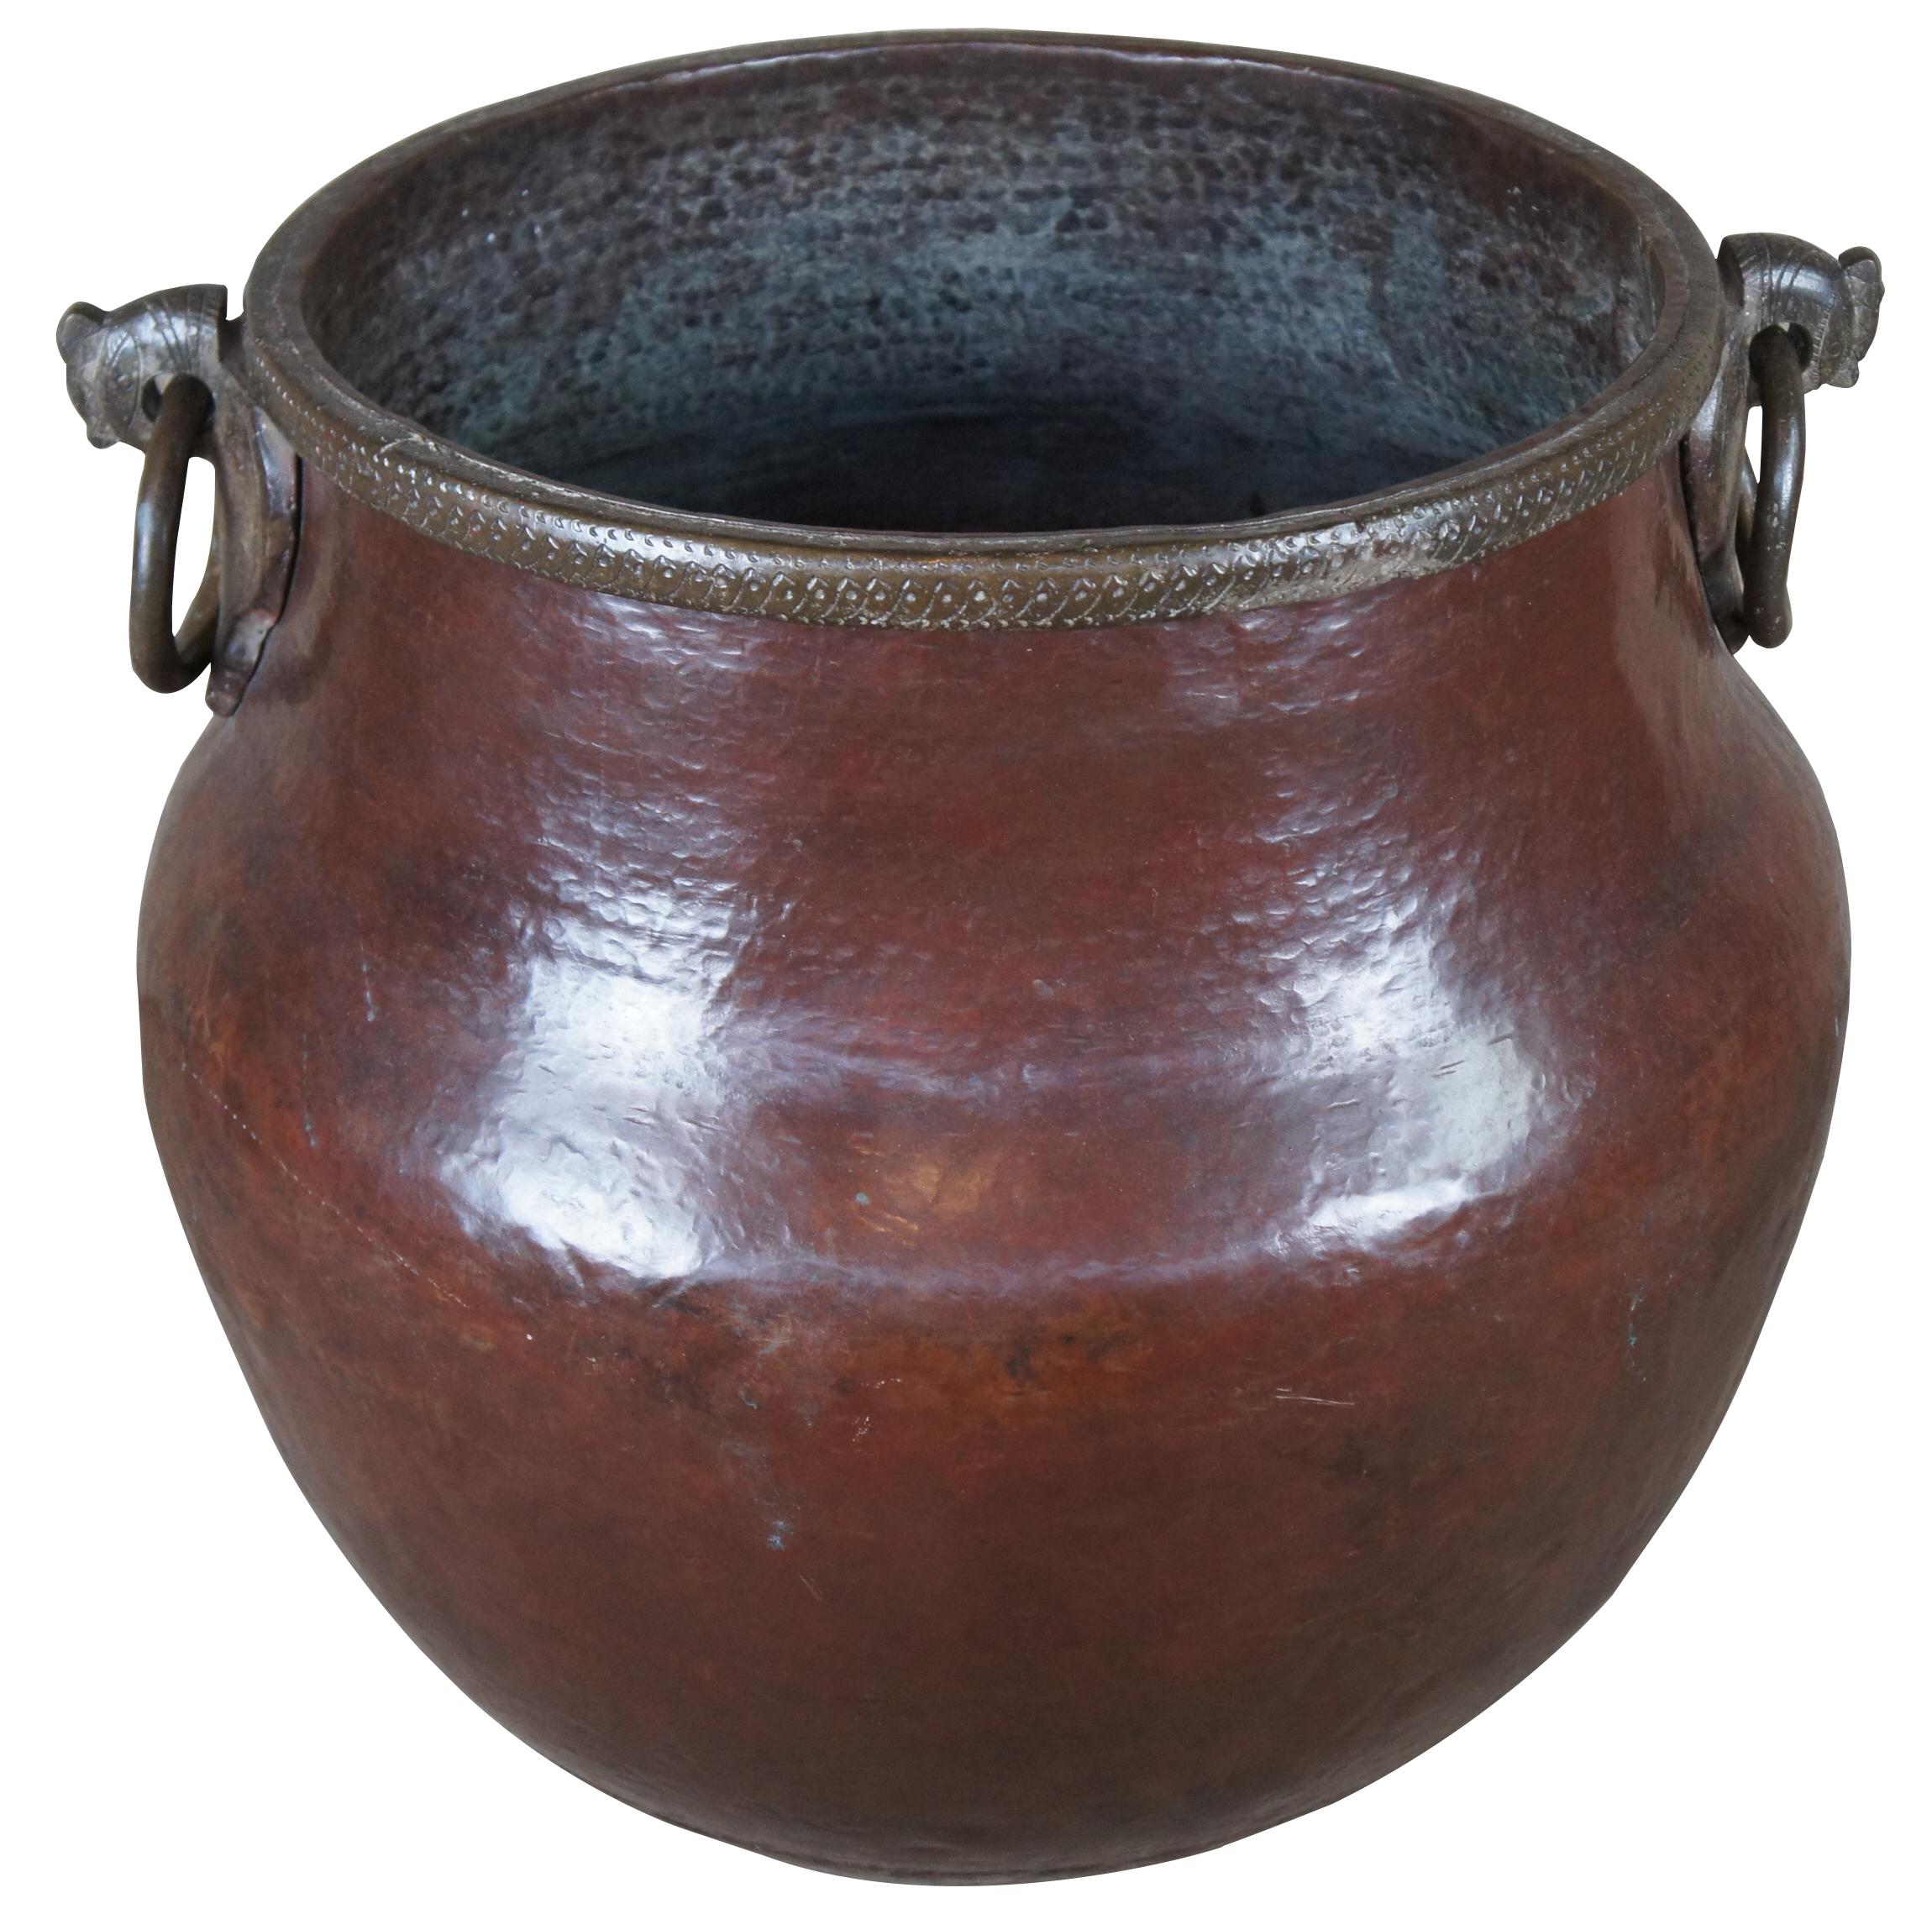 A very large antique hammered copper southern Indian temple water vessel from Tanjore with iron ring handles cock s head mounts and rim band incised and stamped with embellishments.
       